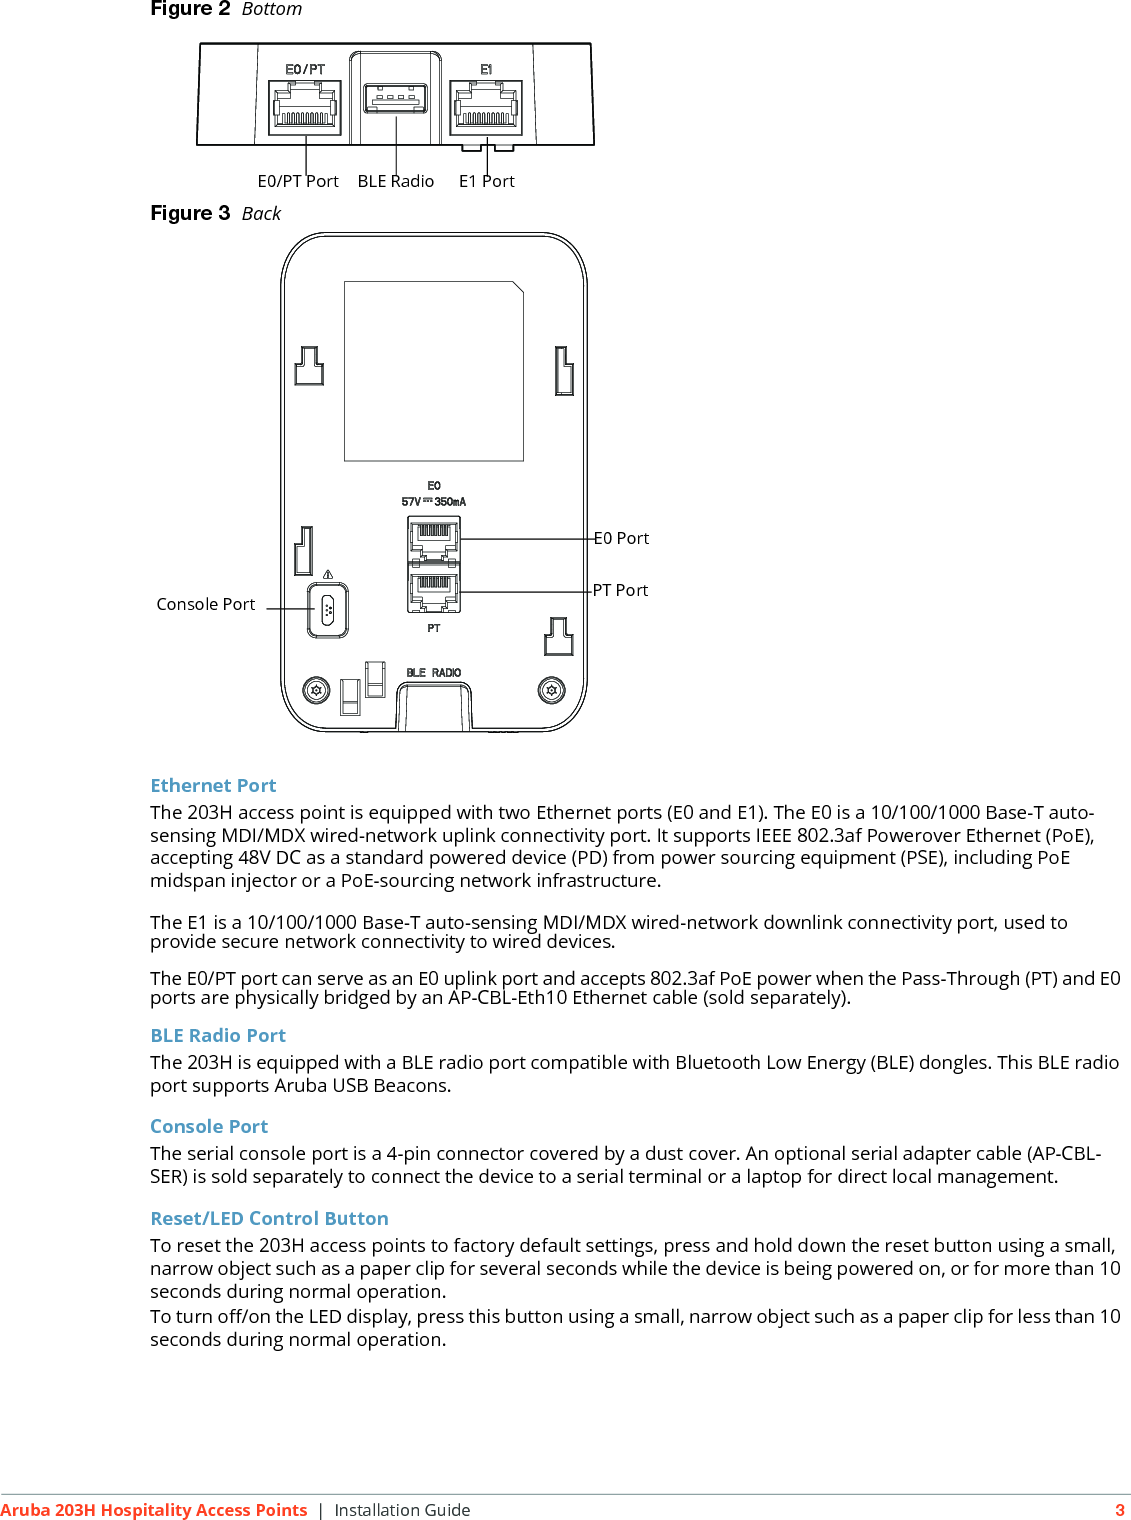 Aruba 203H Hospitality Access Points | Installation Guide 3Figure 2  BottomFigure 3  BackEthernet PortThe 203H access point is equipped with two Ethernet ports (E0 and E1). The E0 is a 10/100/1000 Base-T auto-sensing MDI/MDX wired-network uplink connectivity port. It supports IEEE 802.3af Powerover Ethernet (PoE), accepting 48V DC as a standard powered device (PD) from power sourcing equipment (PSE), including PoE midspan injector or a PoE-sourcing network infrastructure.The E1 is a 10/100/1000 Base-T auto-sensing MDI/MDX wired-network downlink connectivity port, used to provide secure network connectivity to wired devices.The E0/PT port can serve as an E0 uplink port and accepts 802.3af PoE power when the Pass-Through (PT) and E0 ports are physically bridged by an AP-CBL-Eth10 Ethernet cable (sold separately).BLE Radio PortThe 203H is equipped with a BLE radio port compatible with Bluetooth Low Energy (BLE) dongles. This BLE radio port supports Aruba USB Beacons. Console PortThe serial console port is a 4-pin connector covered by a dust cover. An optional serial adapter cable (AP-CBL-SER) is sold separately to connect the device to a serial terminal or a laptop for direct local management. Reset/LED Control ButtonTo reset the 203H access points to factory default settings, press and hold down the reset button using a small, narrow object such as a paper clip for several seconds while the device is being powered on, or for more than 10 seconds during normal operation. To turn off/on the LED display, press this button using a small, narrow object such as a paper clip for less than 10 seconds during normal operation.E1 PortE0/PT Port BLE RadioPT PortE0 PortConsole Port